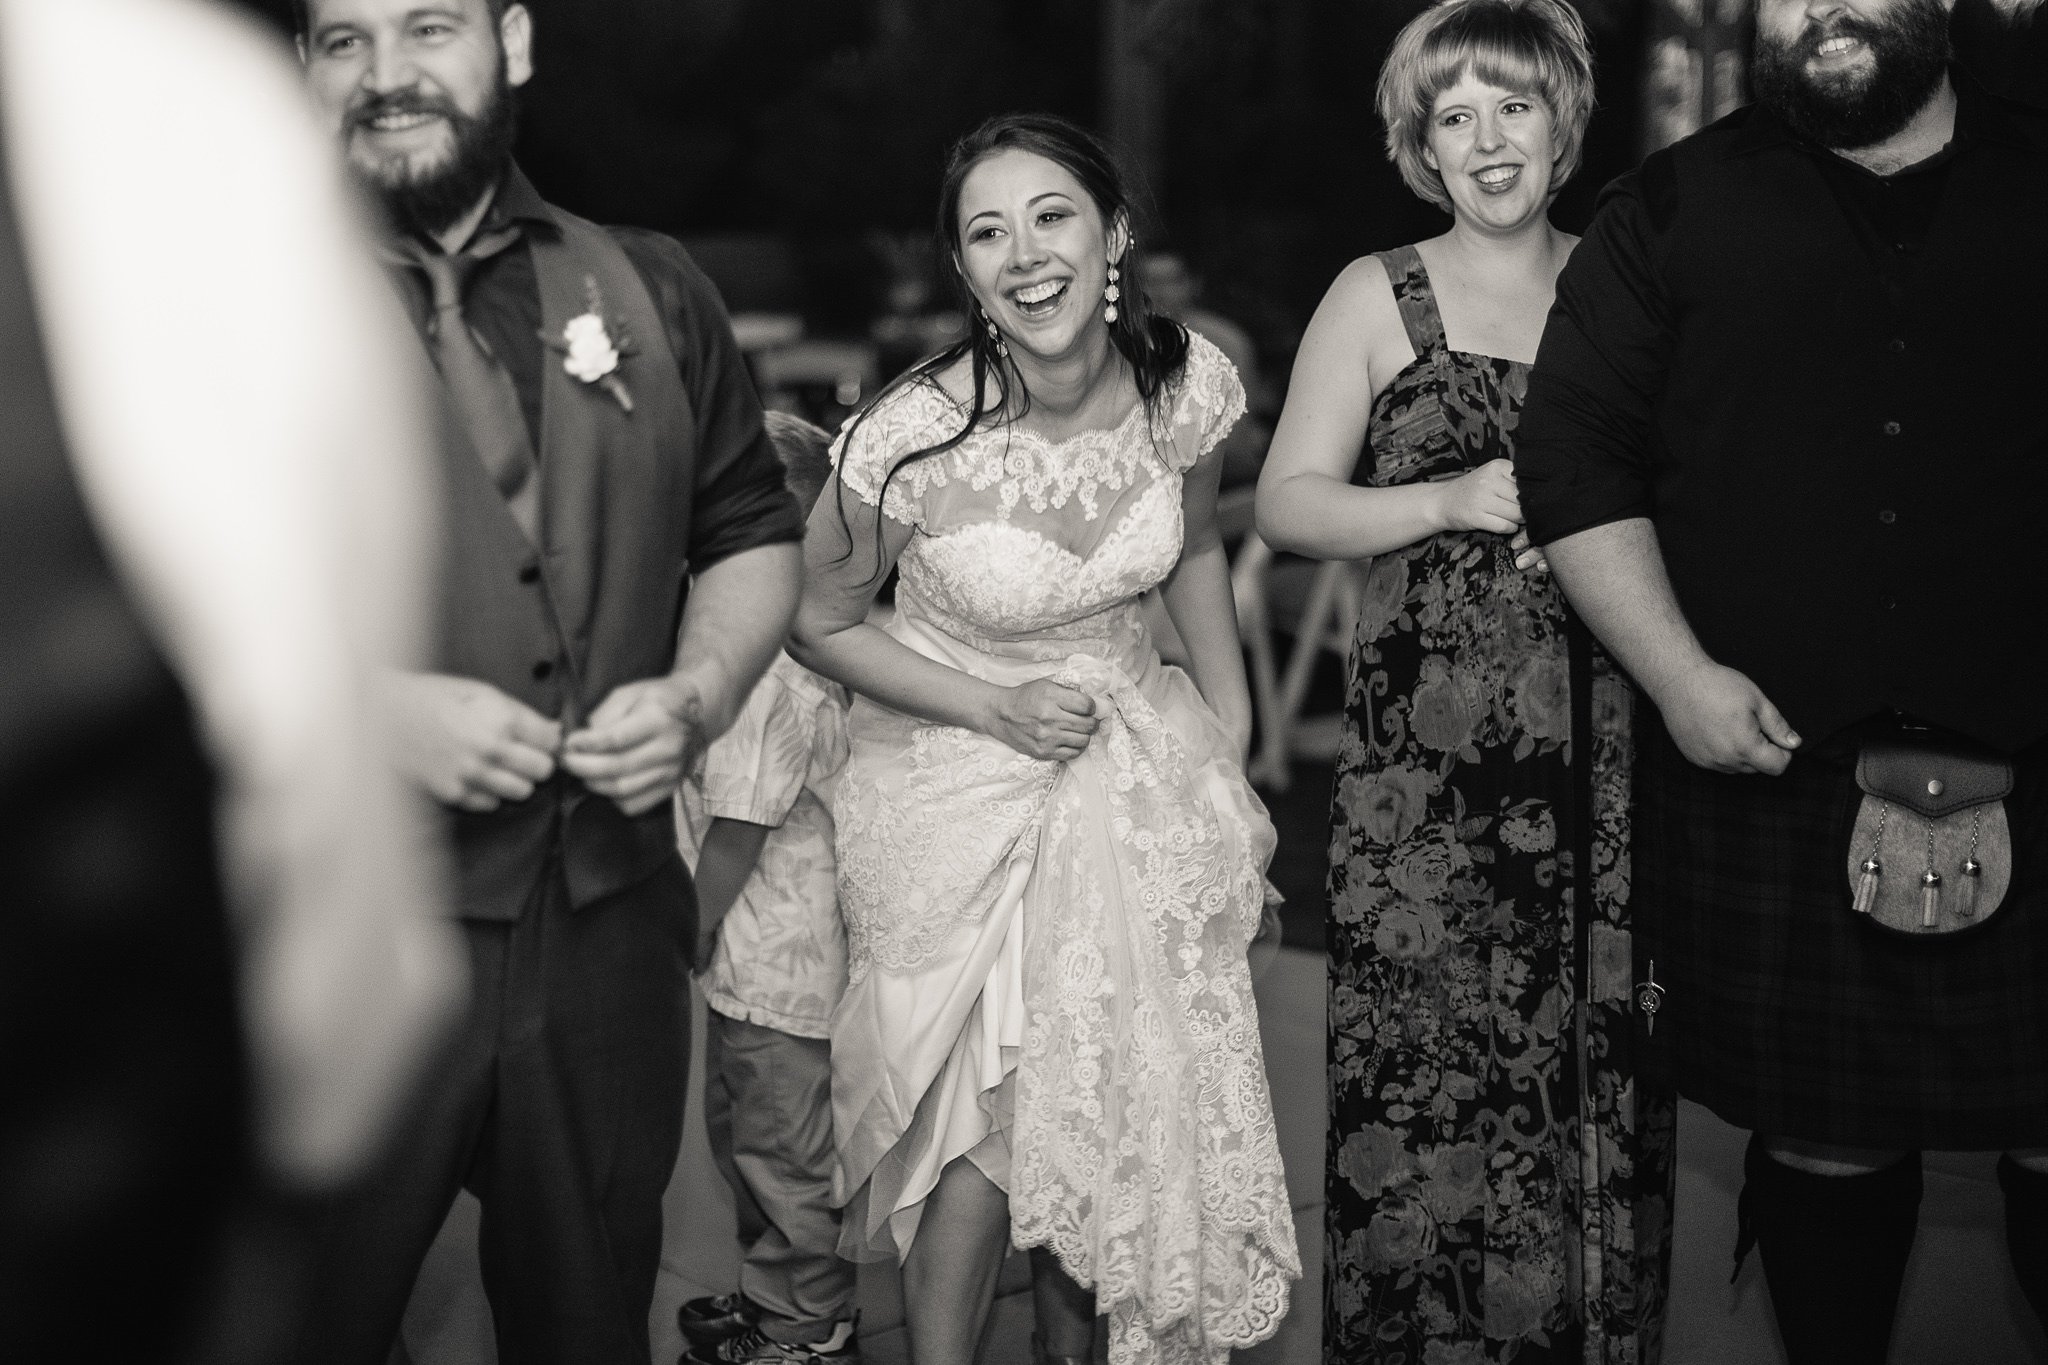 Black and white image of bride having fun dancing with guests at wedding reception by Arizona wedding photographer PMA Photography.